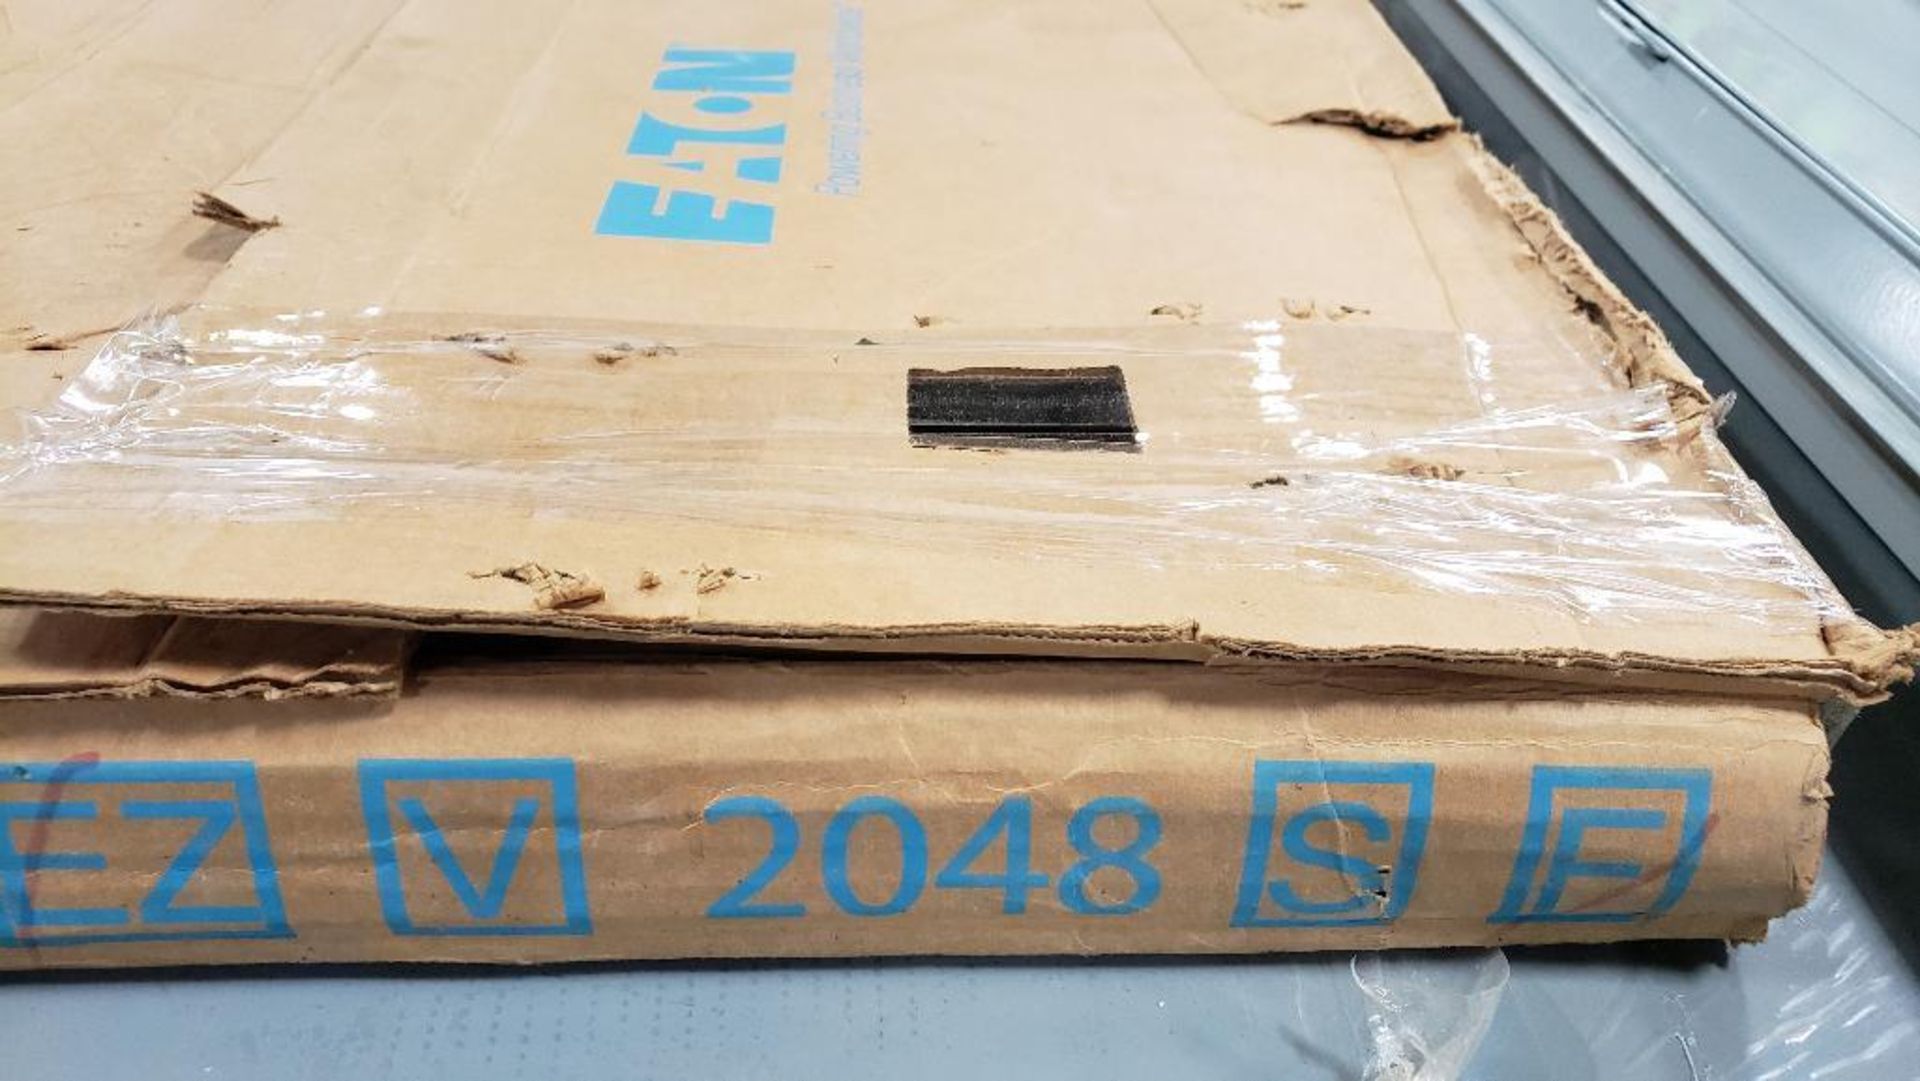 Eaton trim panel. Part number 42C4299H01. New as pictured. - Image 9 of 9